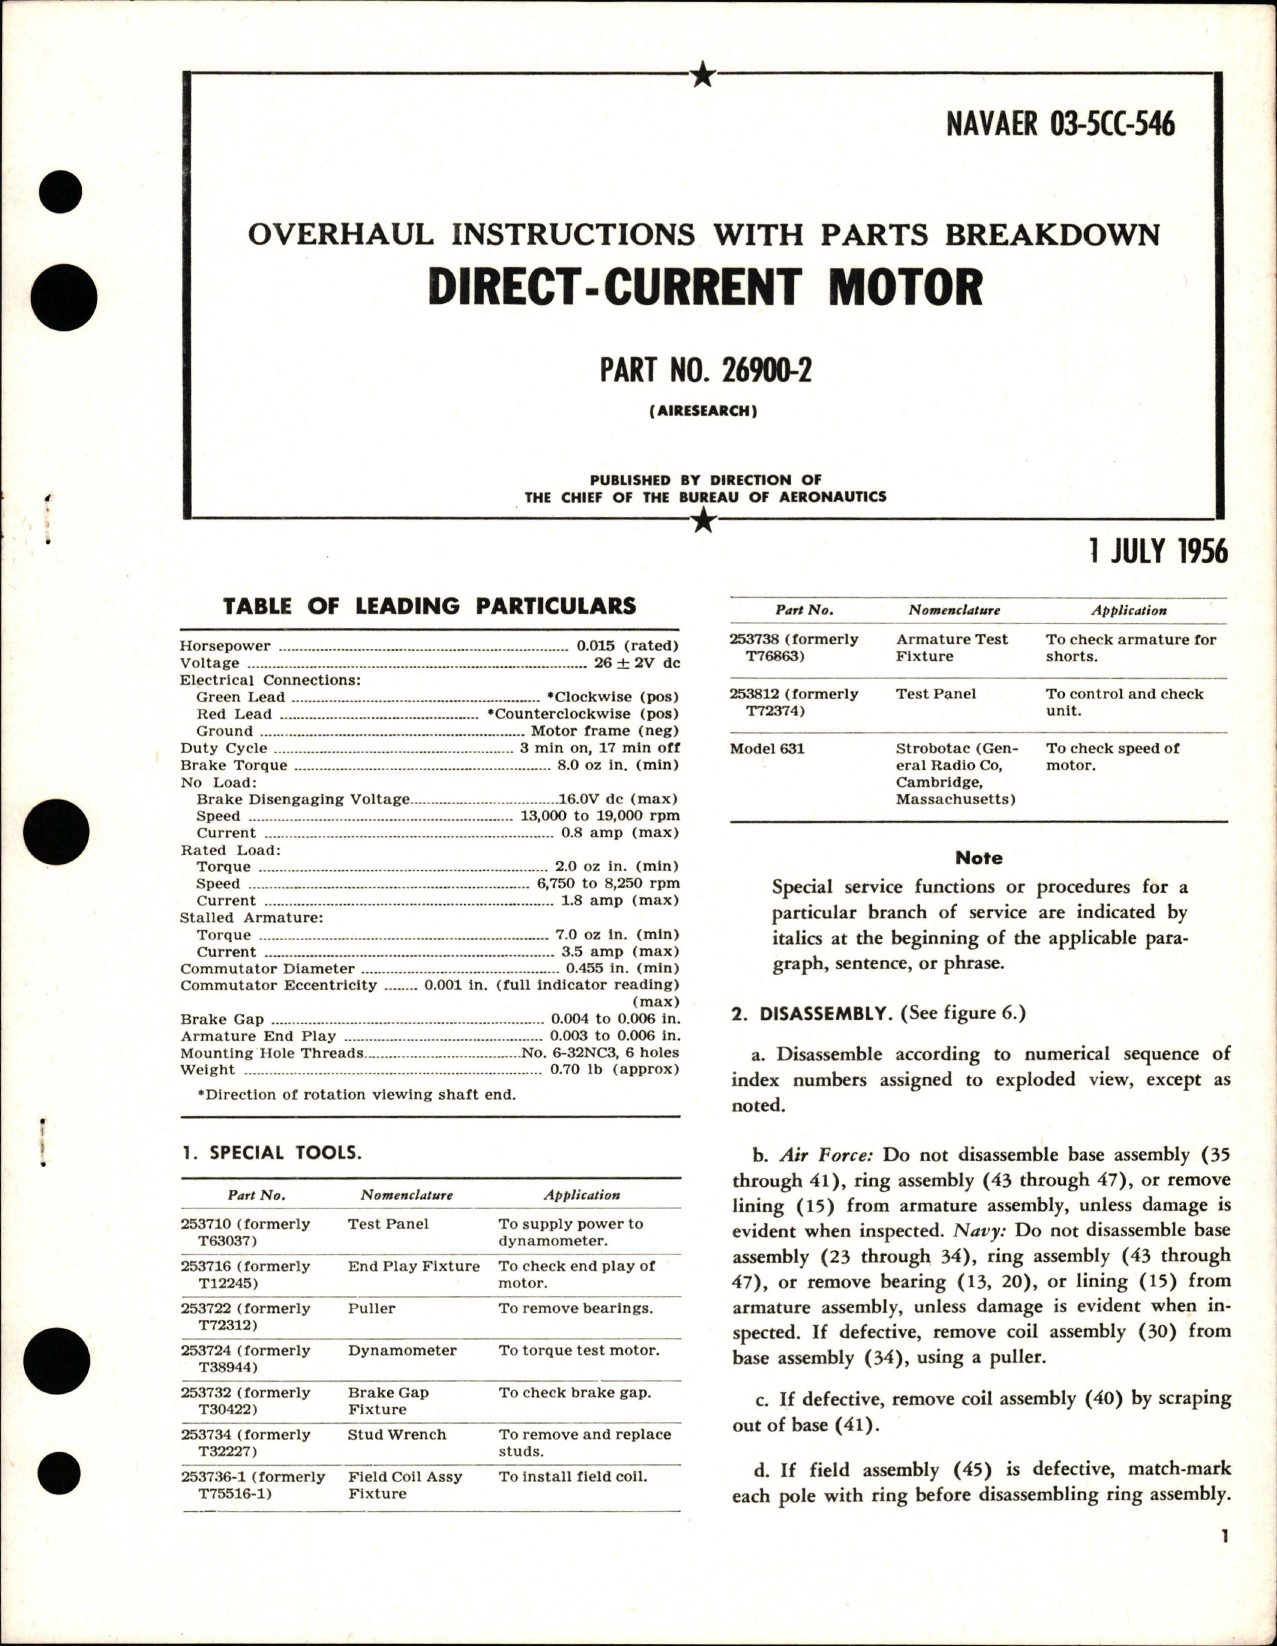 Sample page 1 from AirCorps Library document: Overhaul Instructions with Parts Breakdown for Direct-Current Motor - Part 26900-2